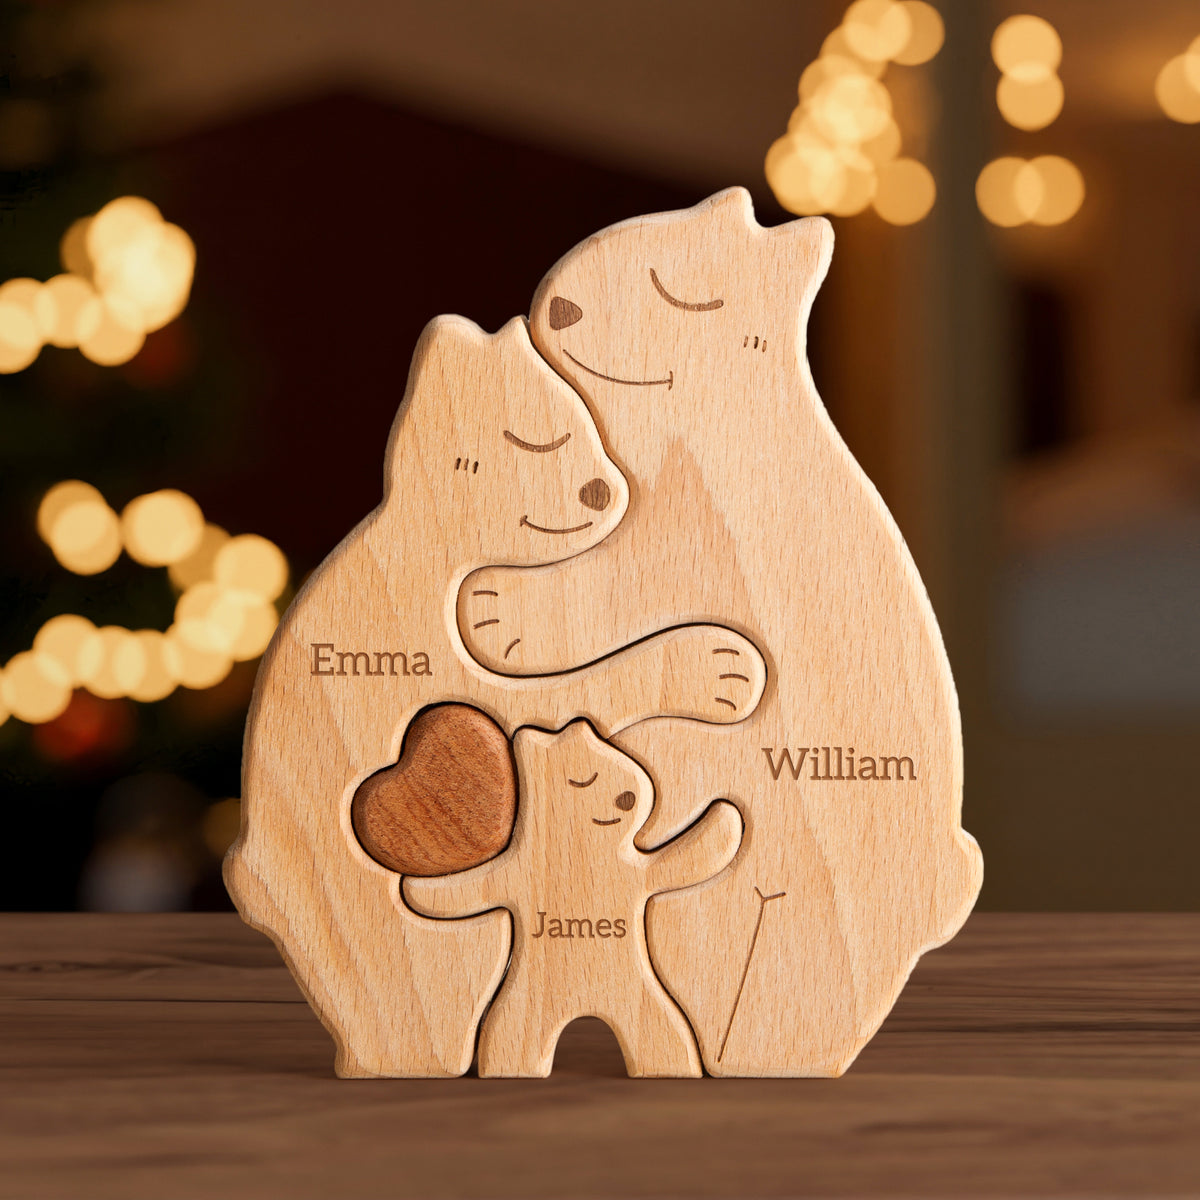 Wooden Bears Family Puzzle, Personalized Jigsaw Puzzles for Adults and Kids with 2-5 Names